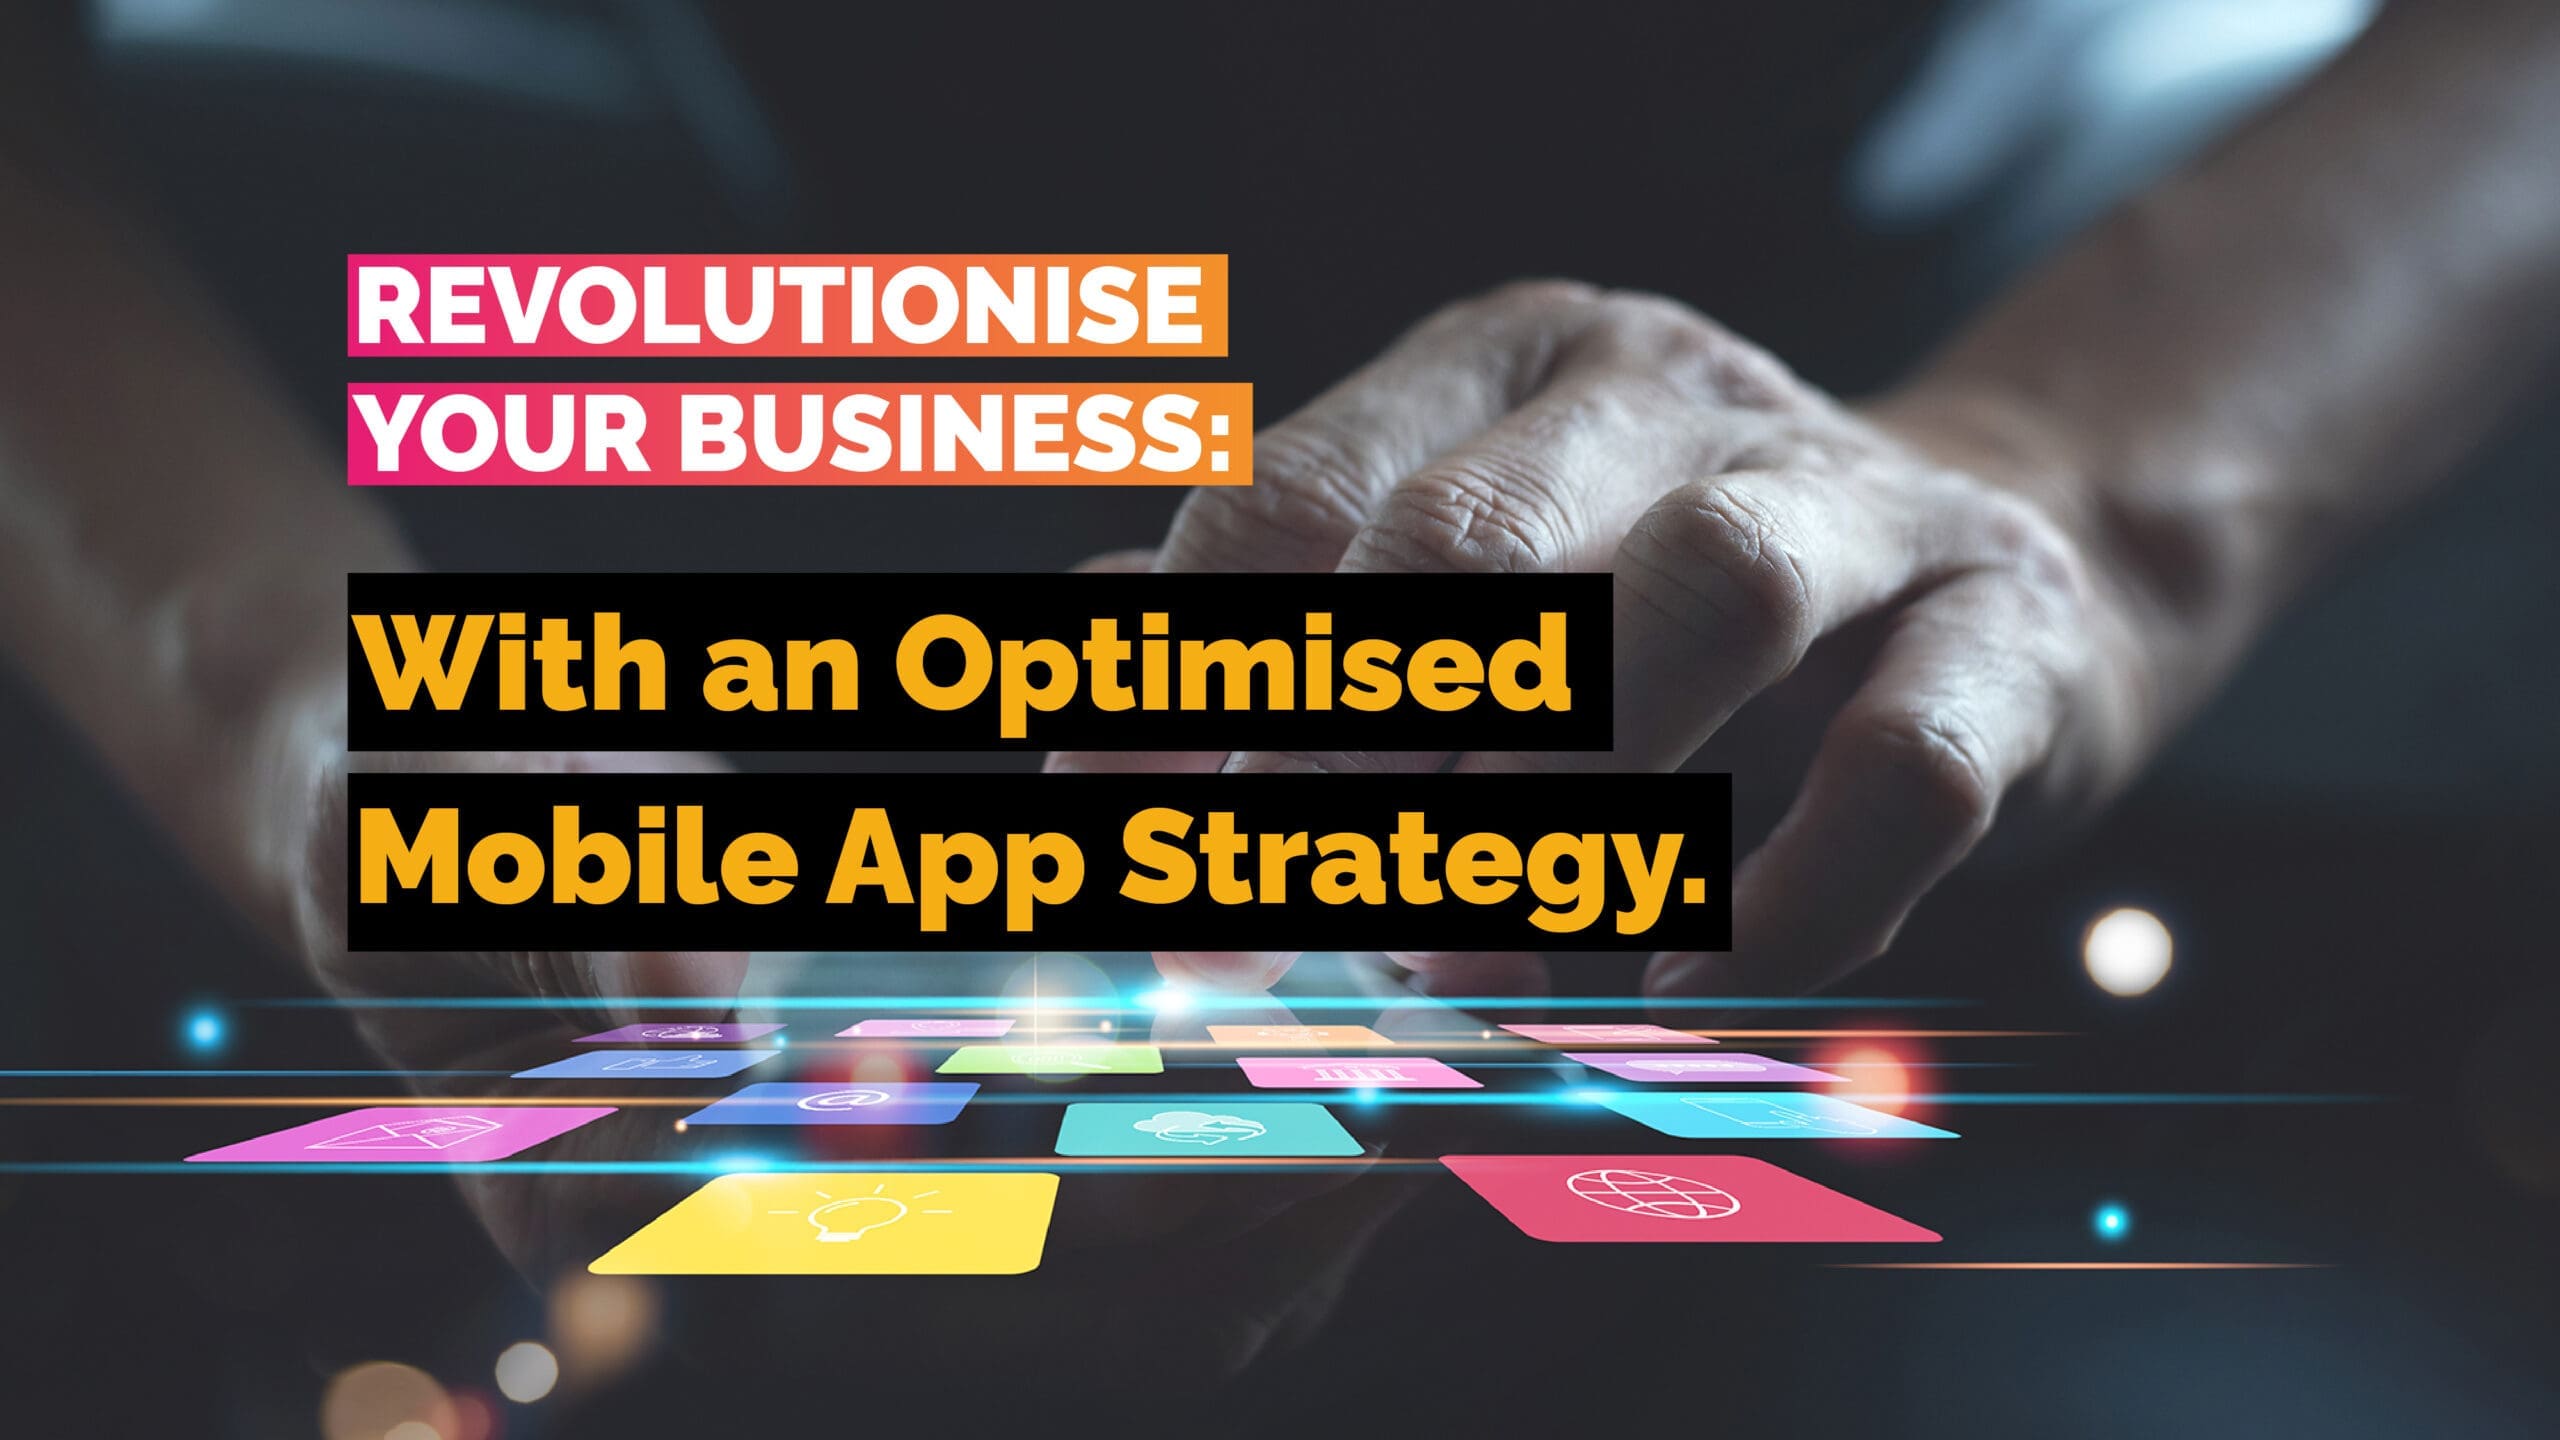 Revolutionise Your Business with an Optimised Mobile App Strategy - VOiD Applications